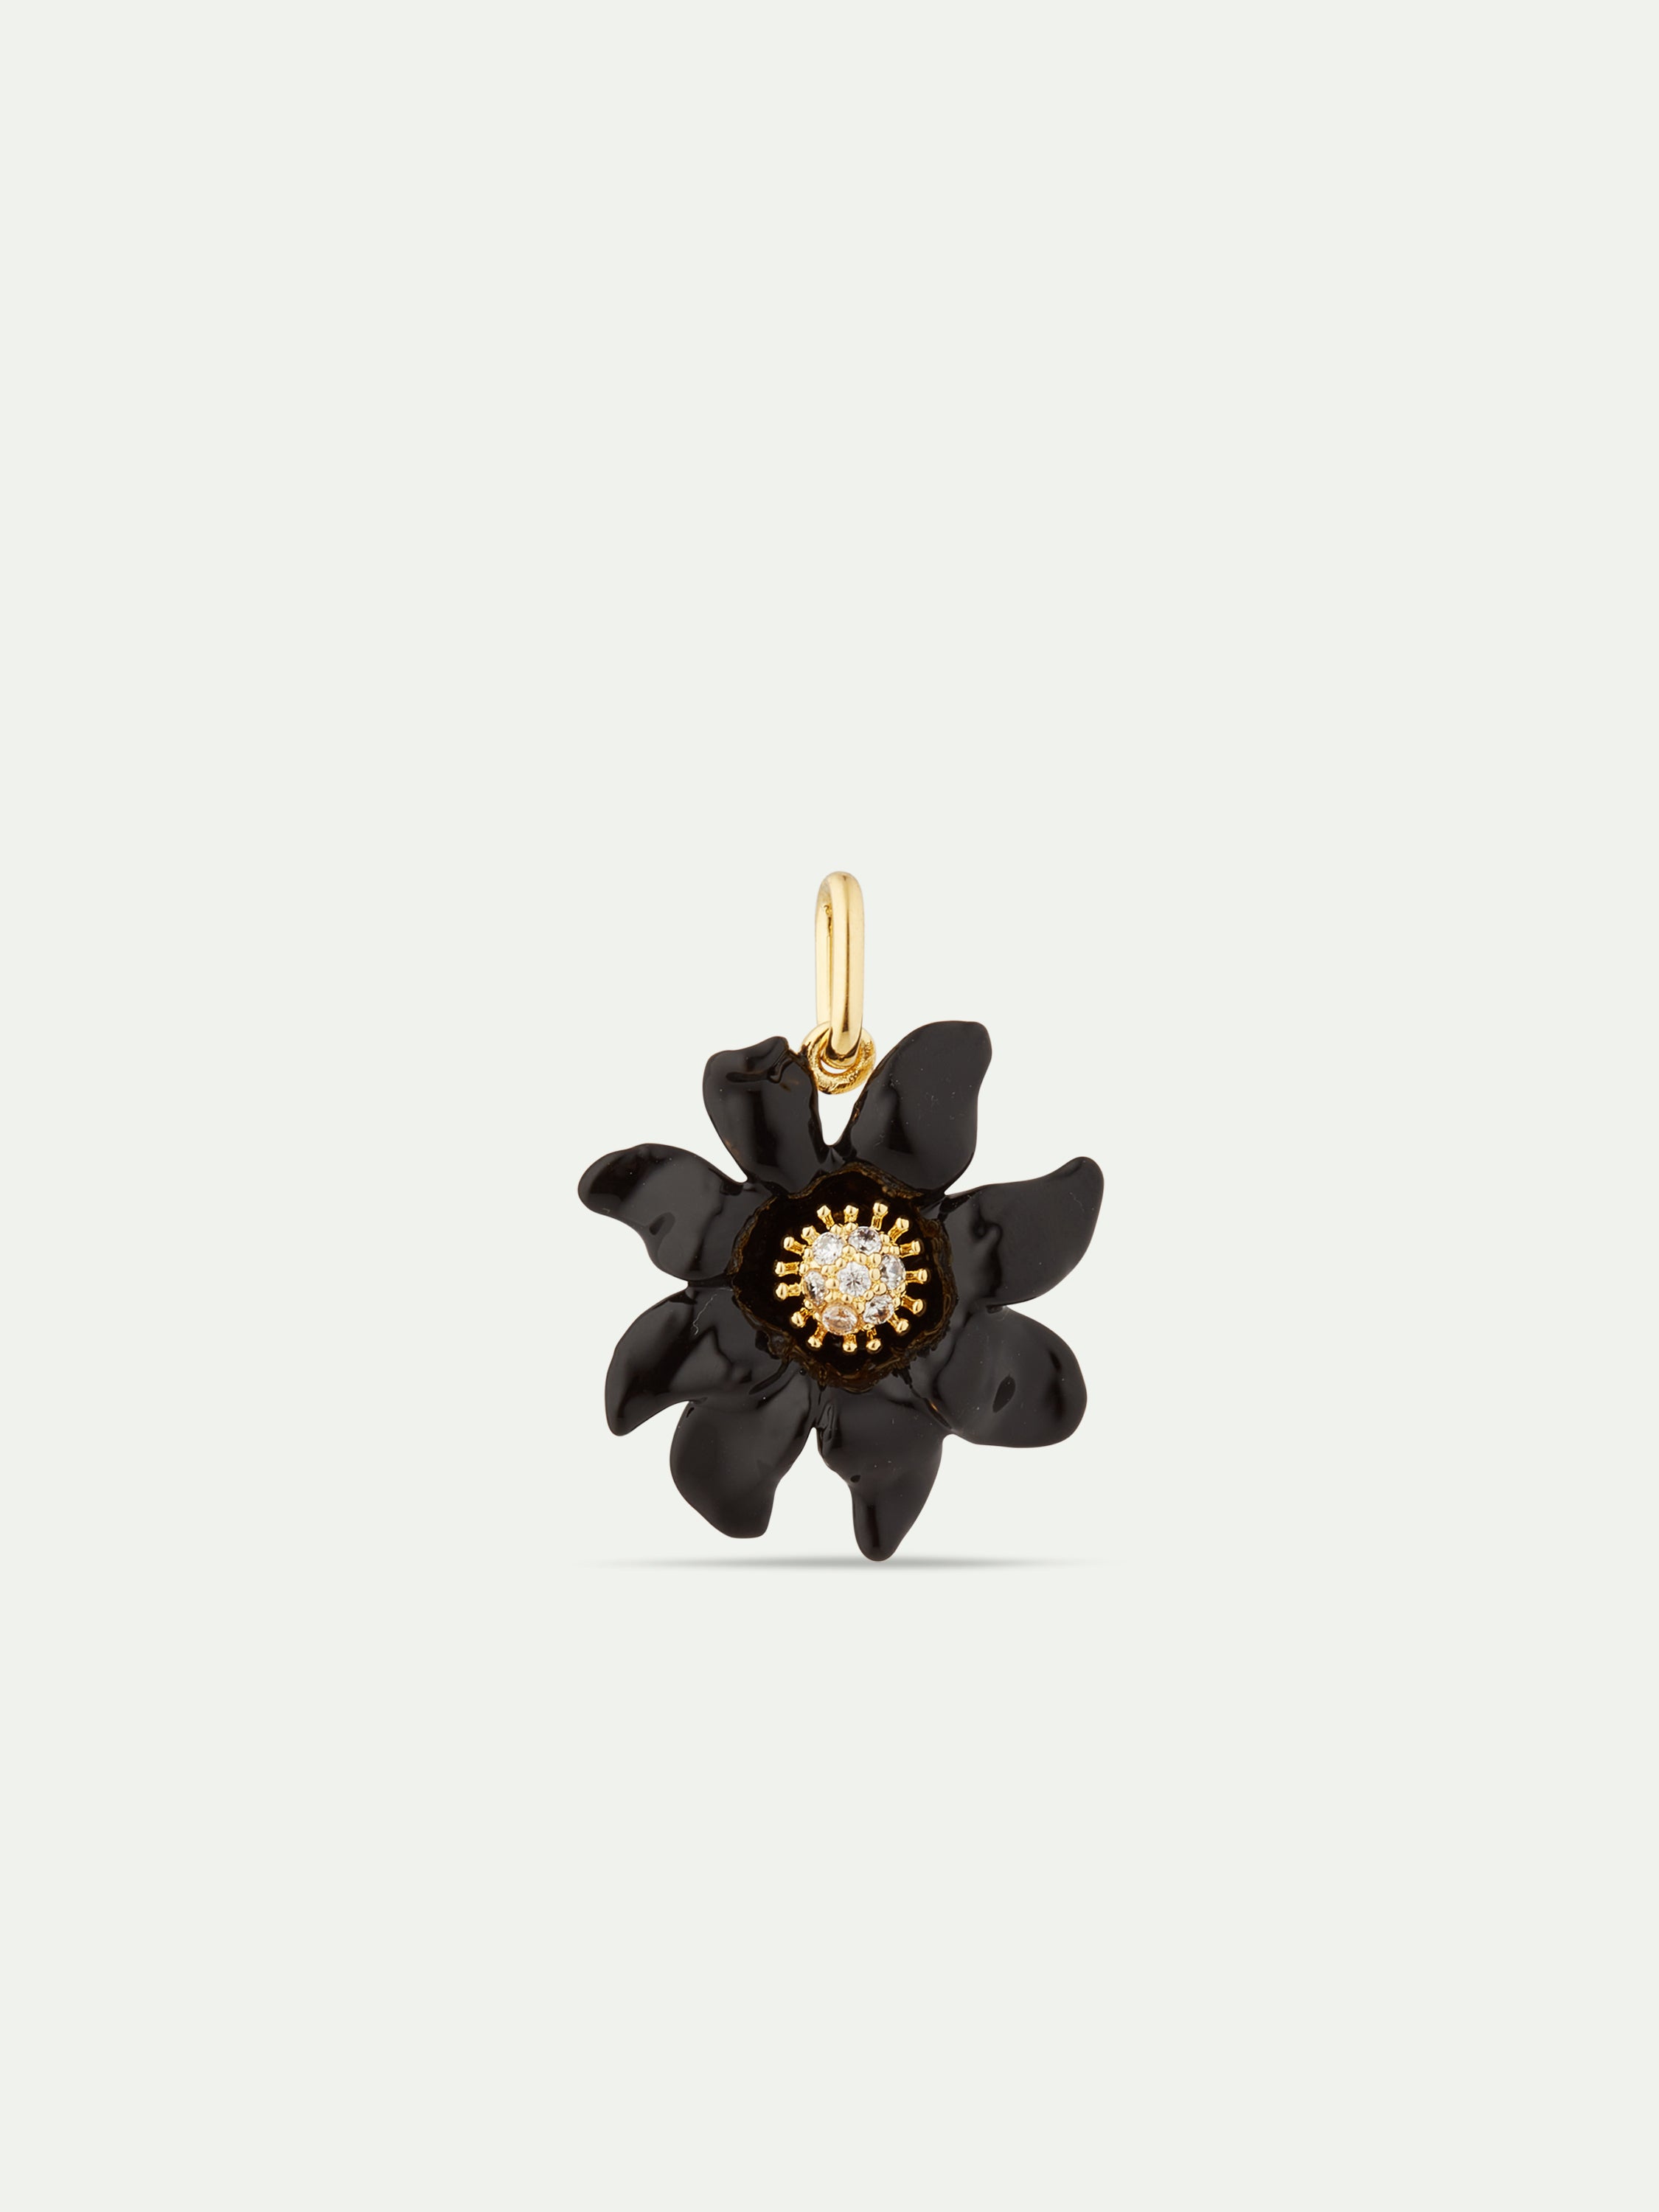 Black lily flower pendant: Elegance and Protection